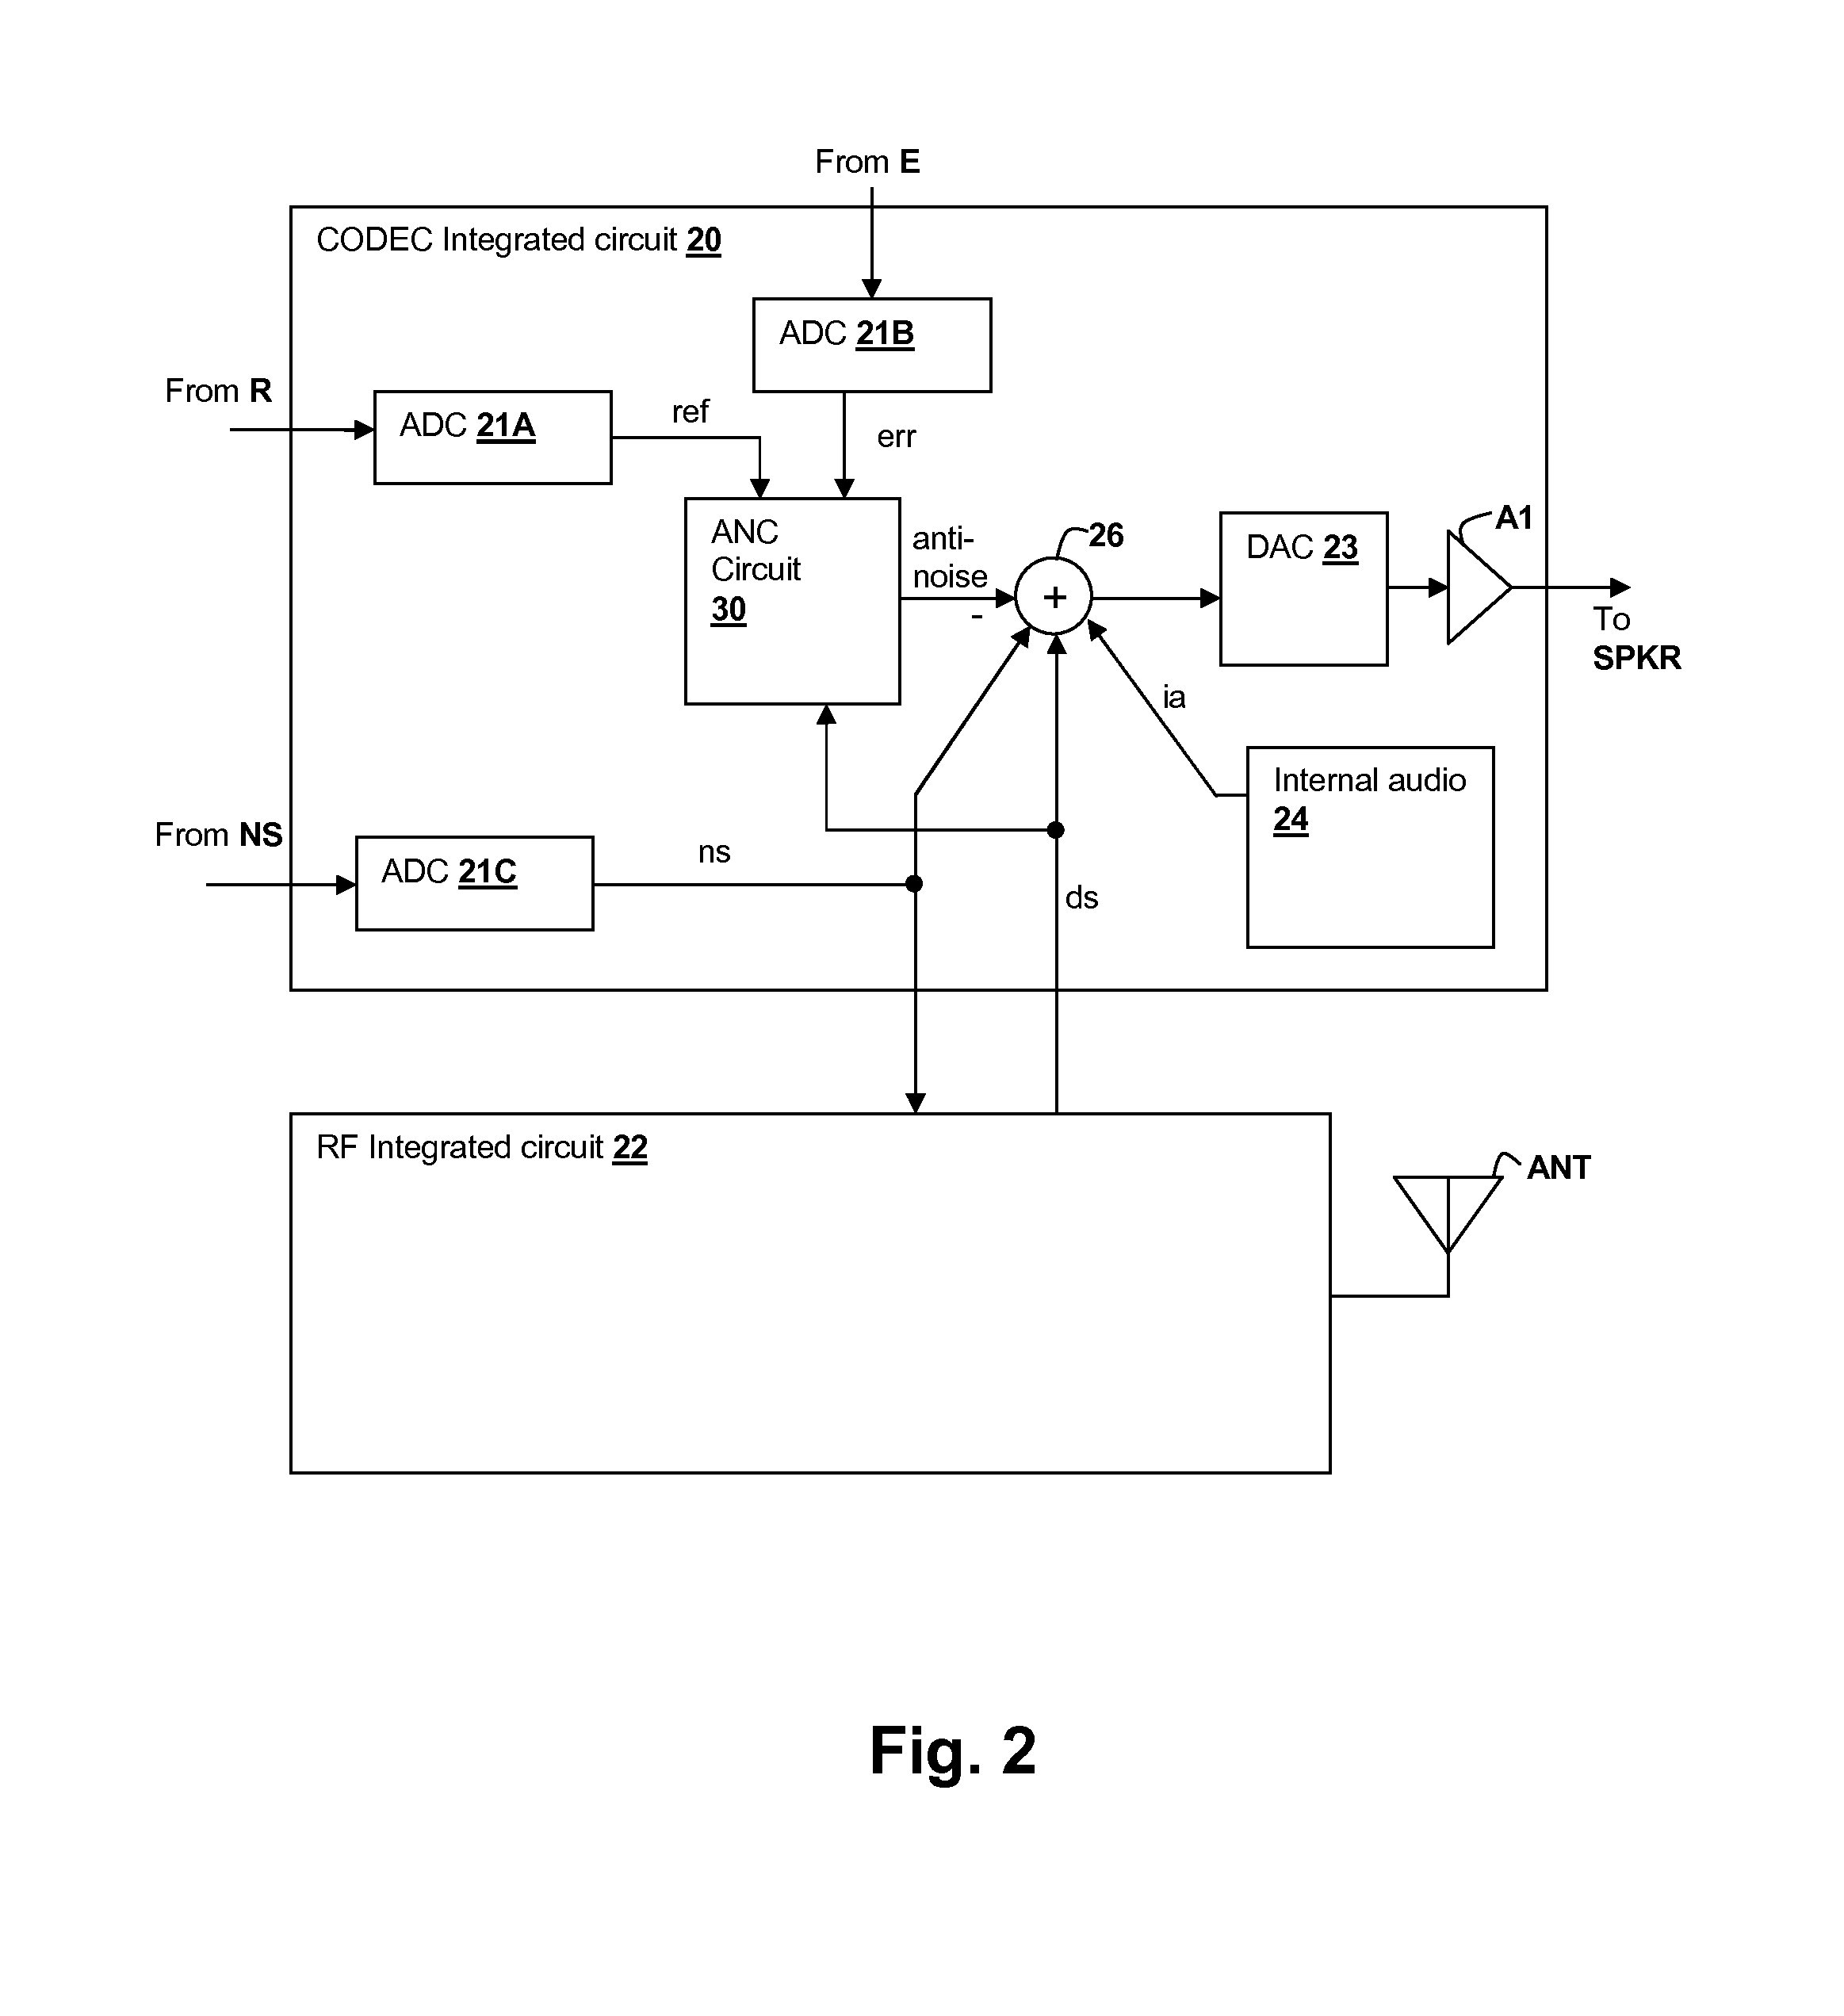 Adaptive noise canceling architecture for a personal audio device